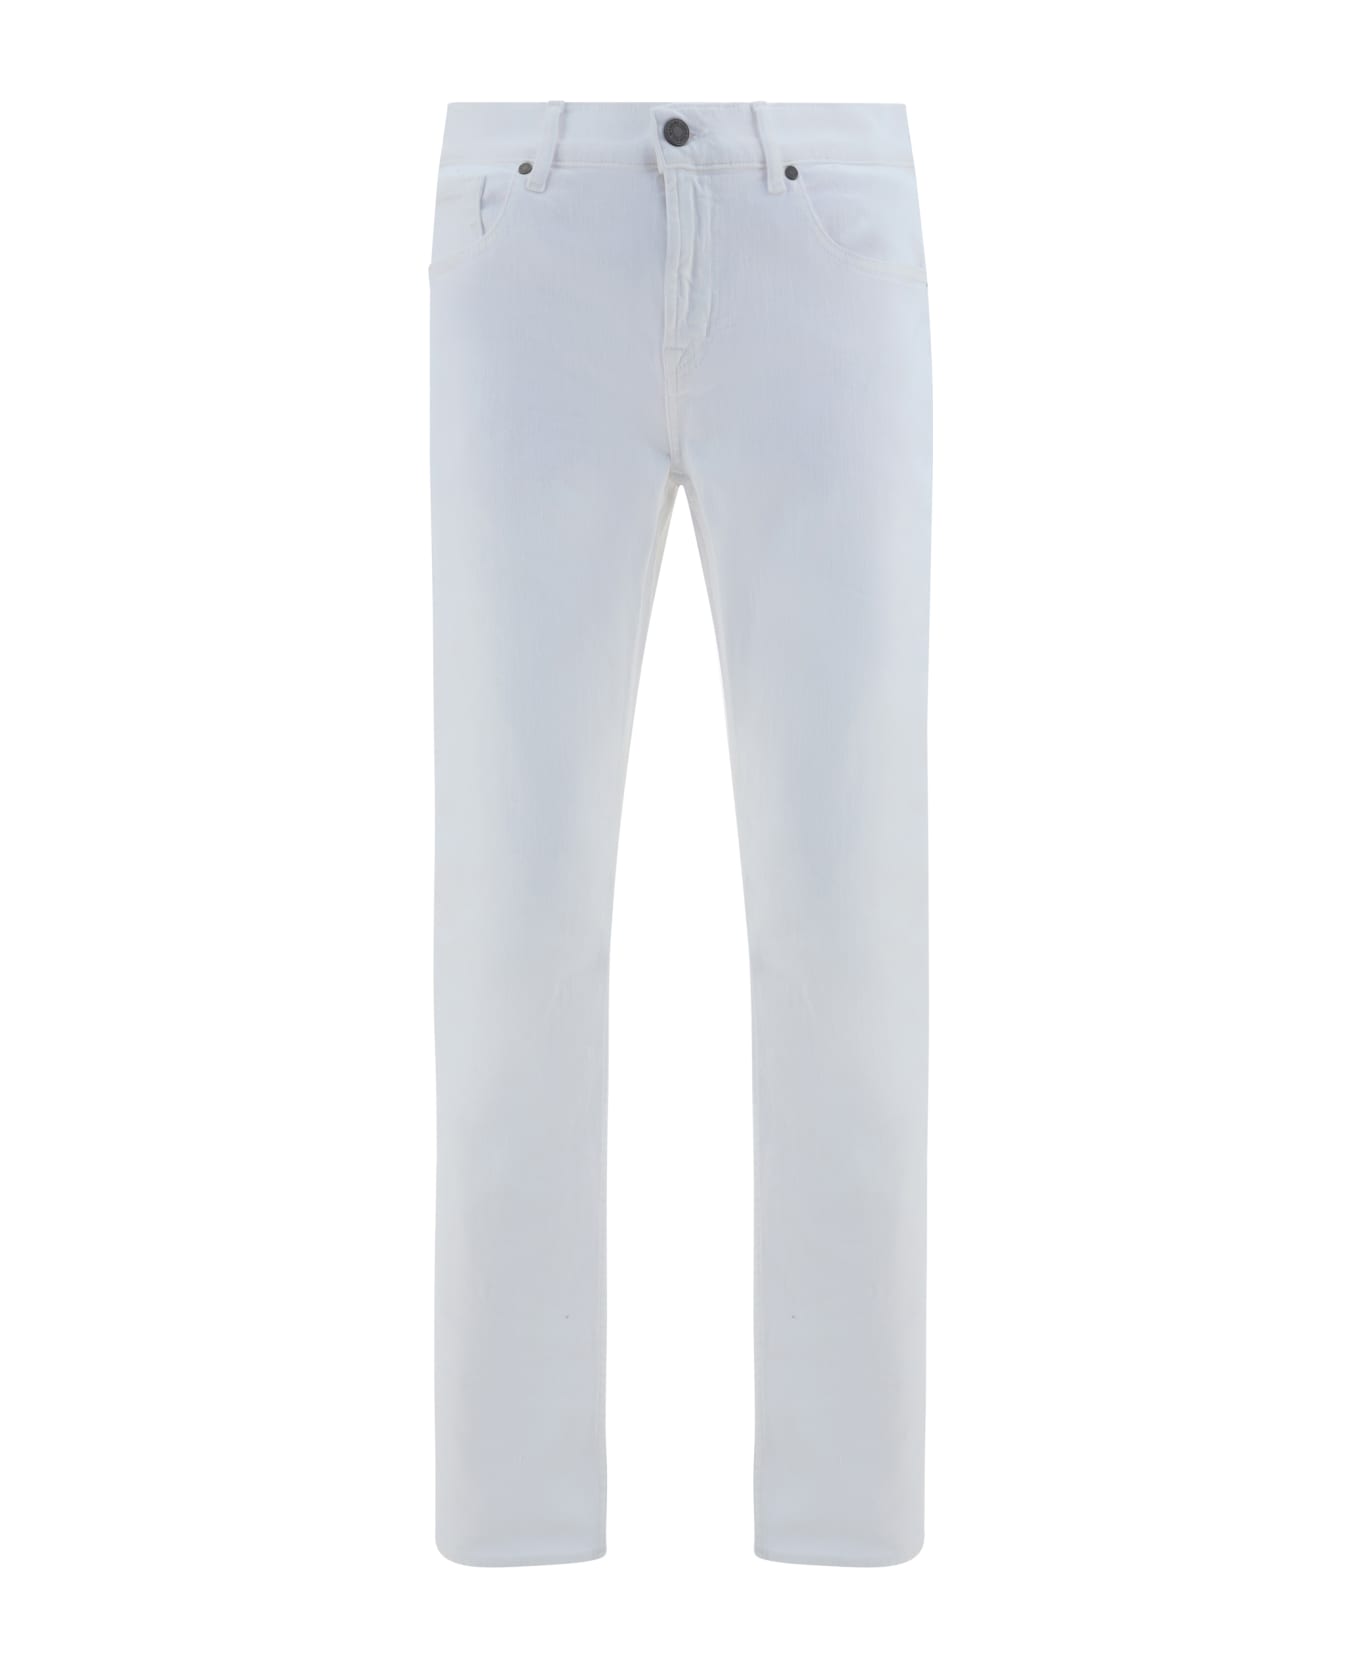 7 For All Mankind Luxe Pants - White ボトムス